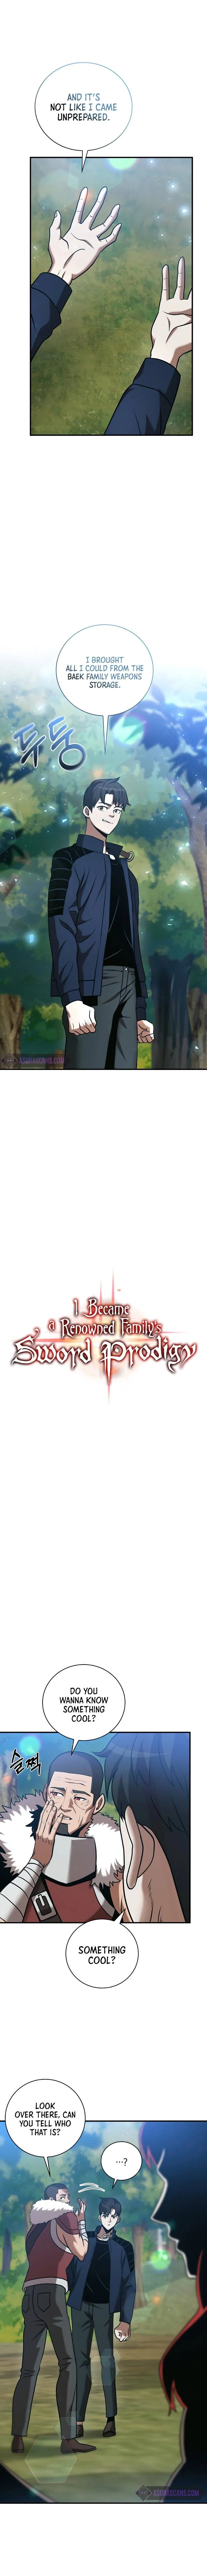 I Became a Renowned Family’s Sword Prodigy Chapter 20 page 3